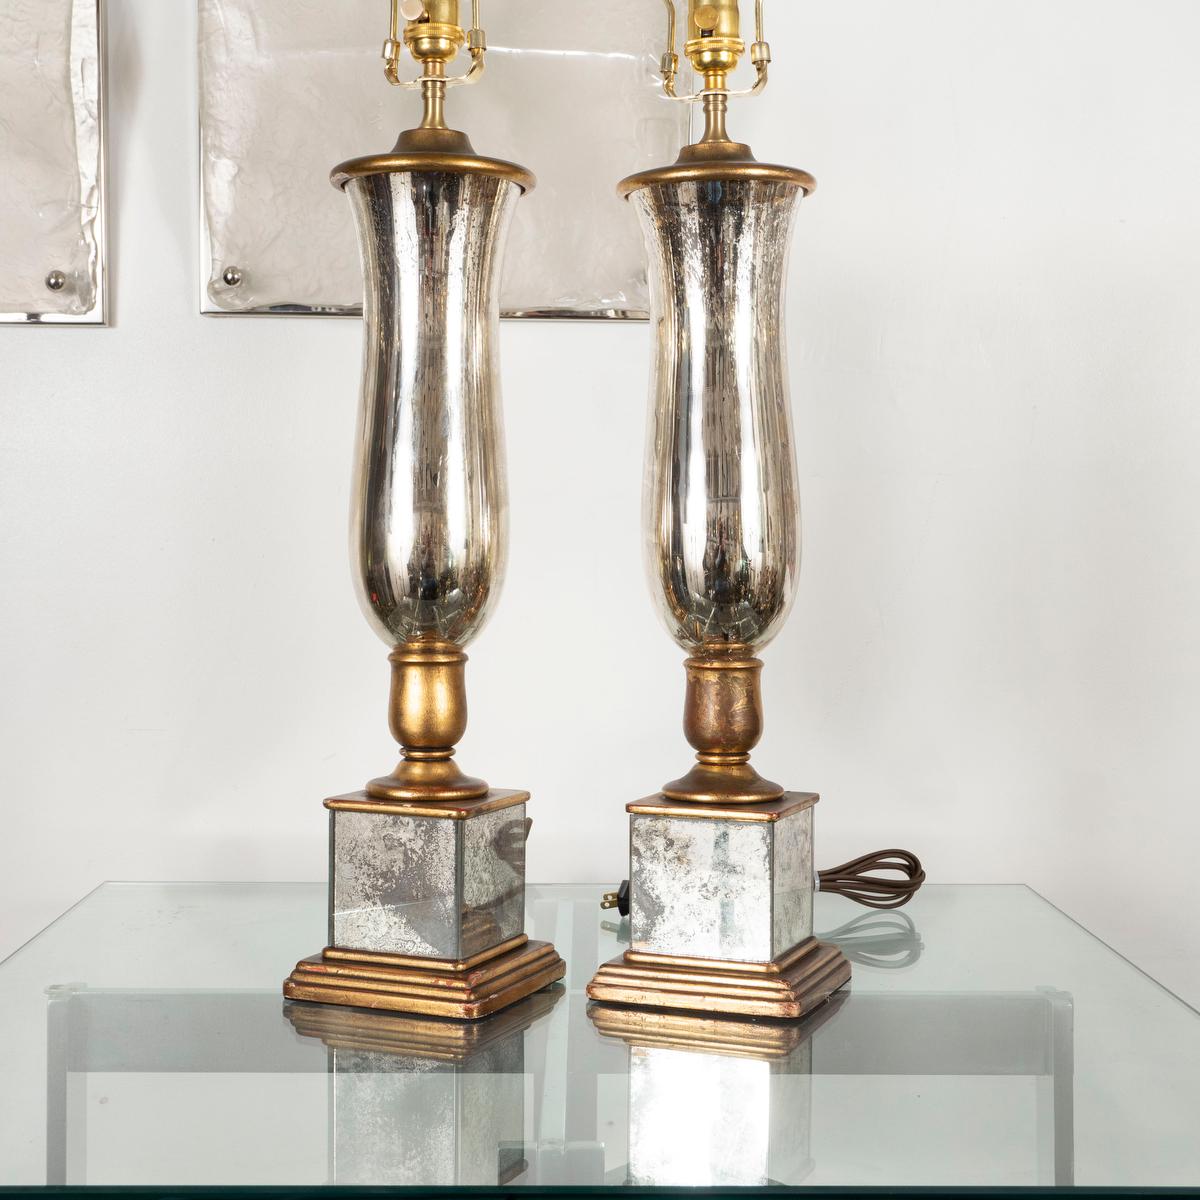 Pair of Urn-Shaped Mercury Glass Lamps In Good Condition For Sale In Tarrytown, NY